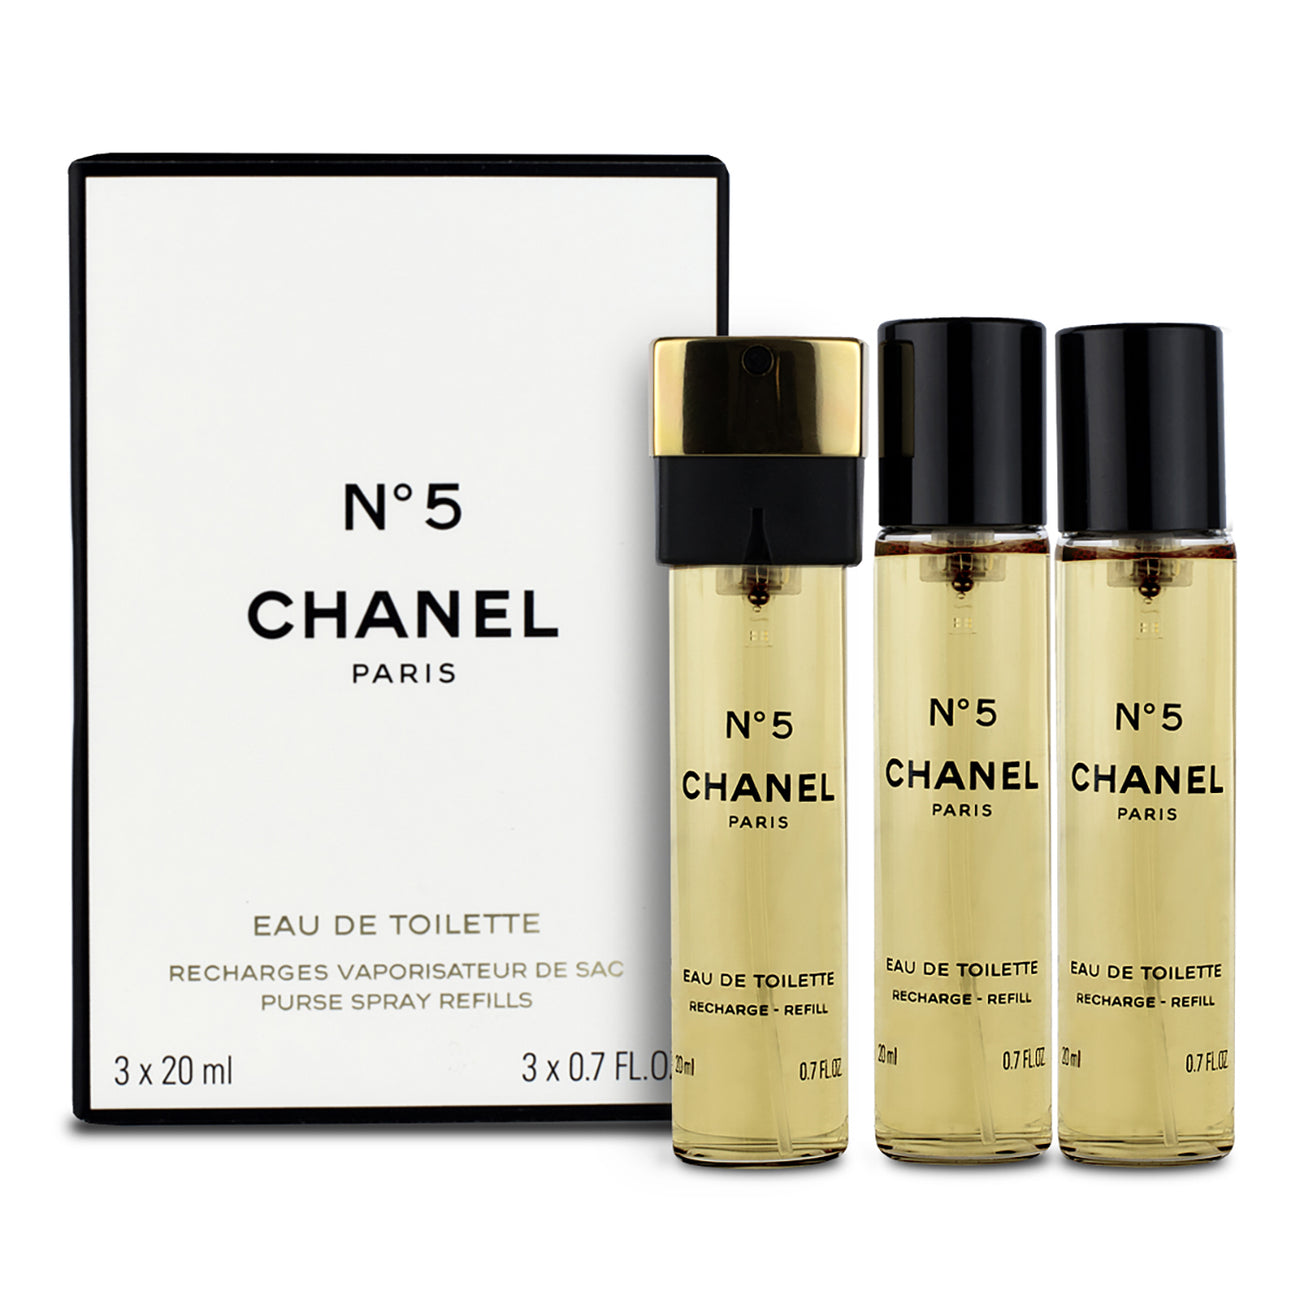 Chanel No. 5 by Chanel for Women 0.25 oz Parfum Classic Spray Refill